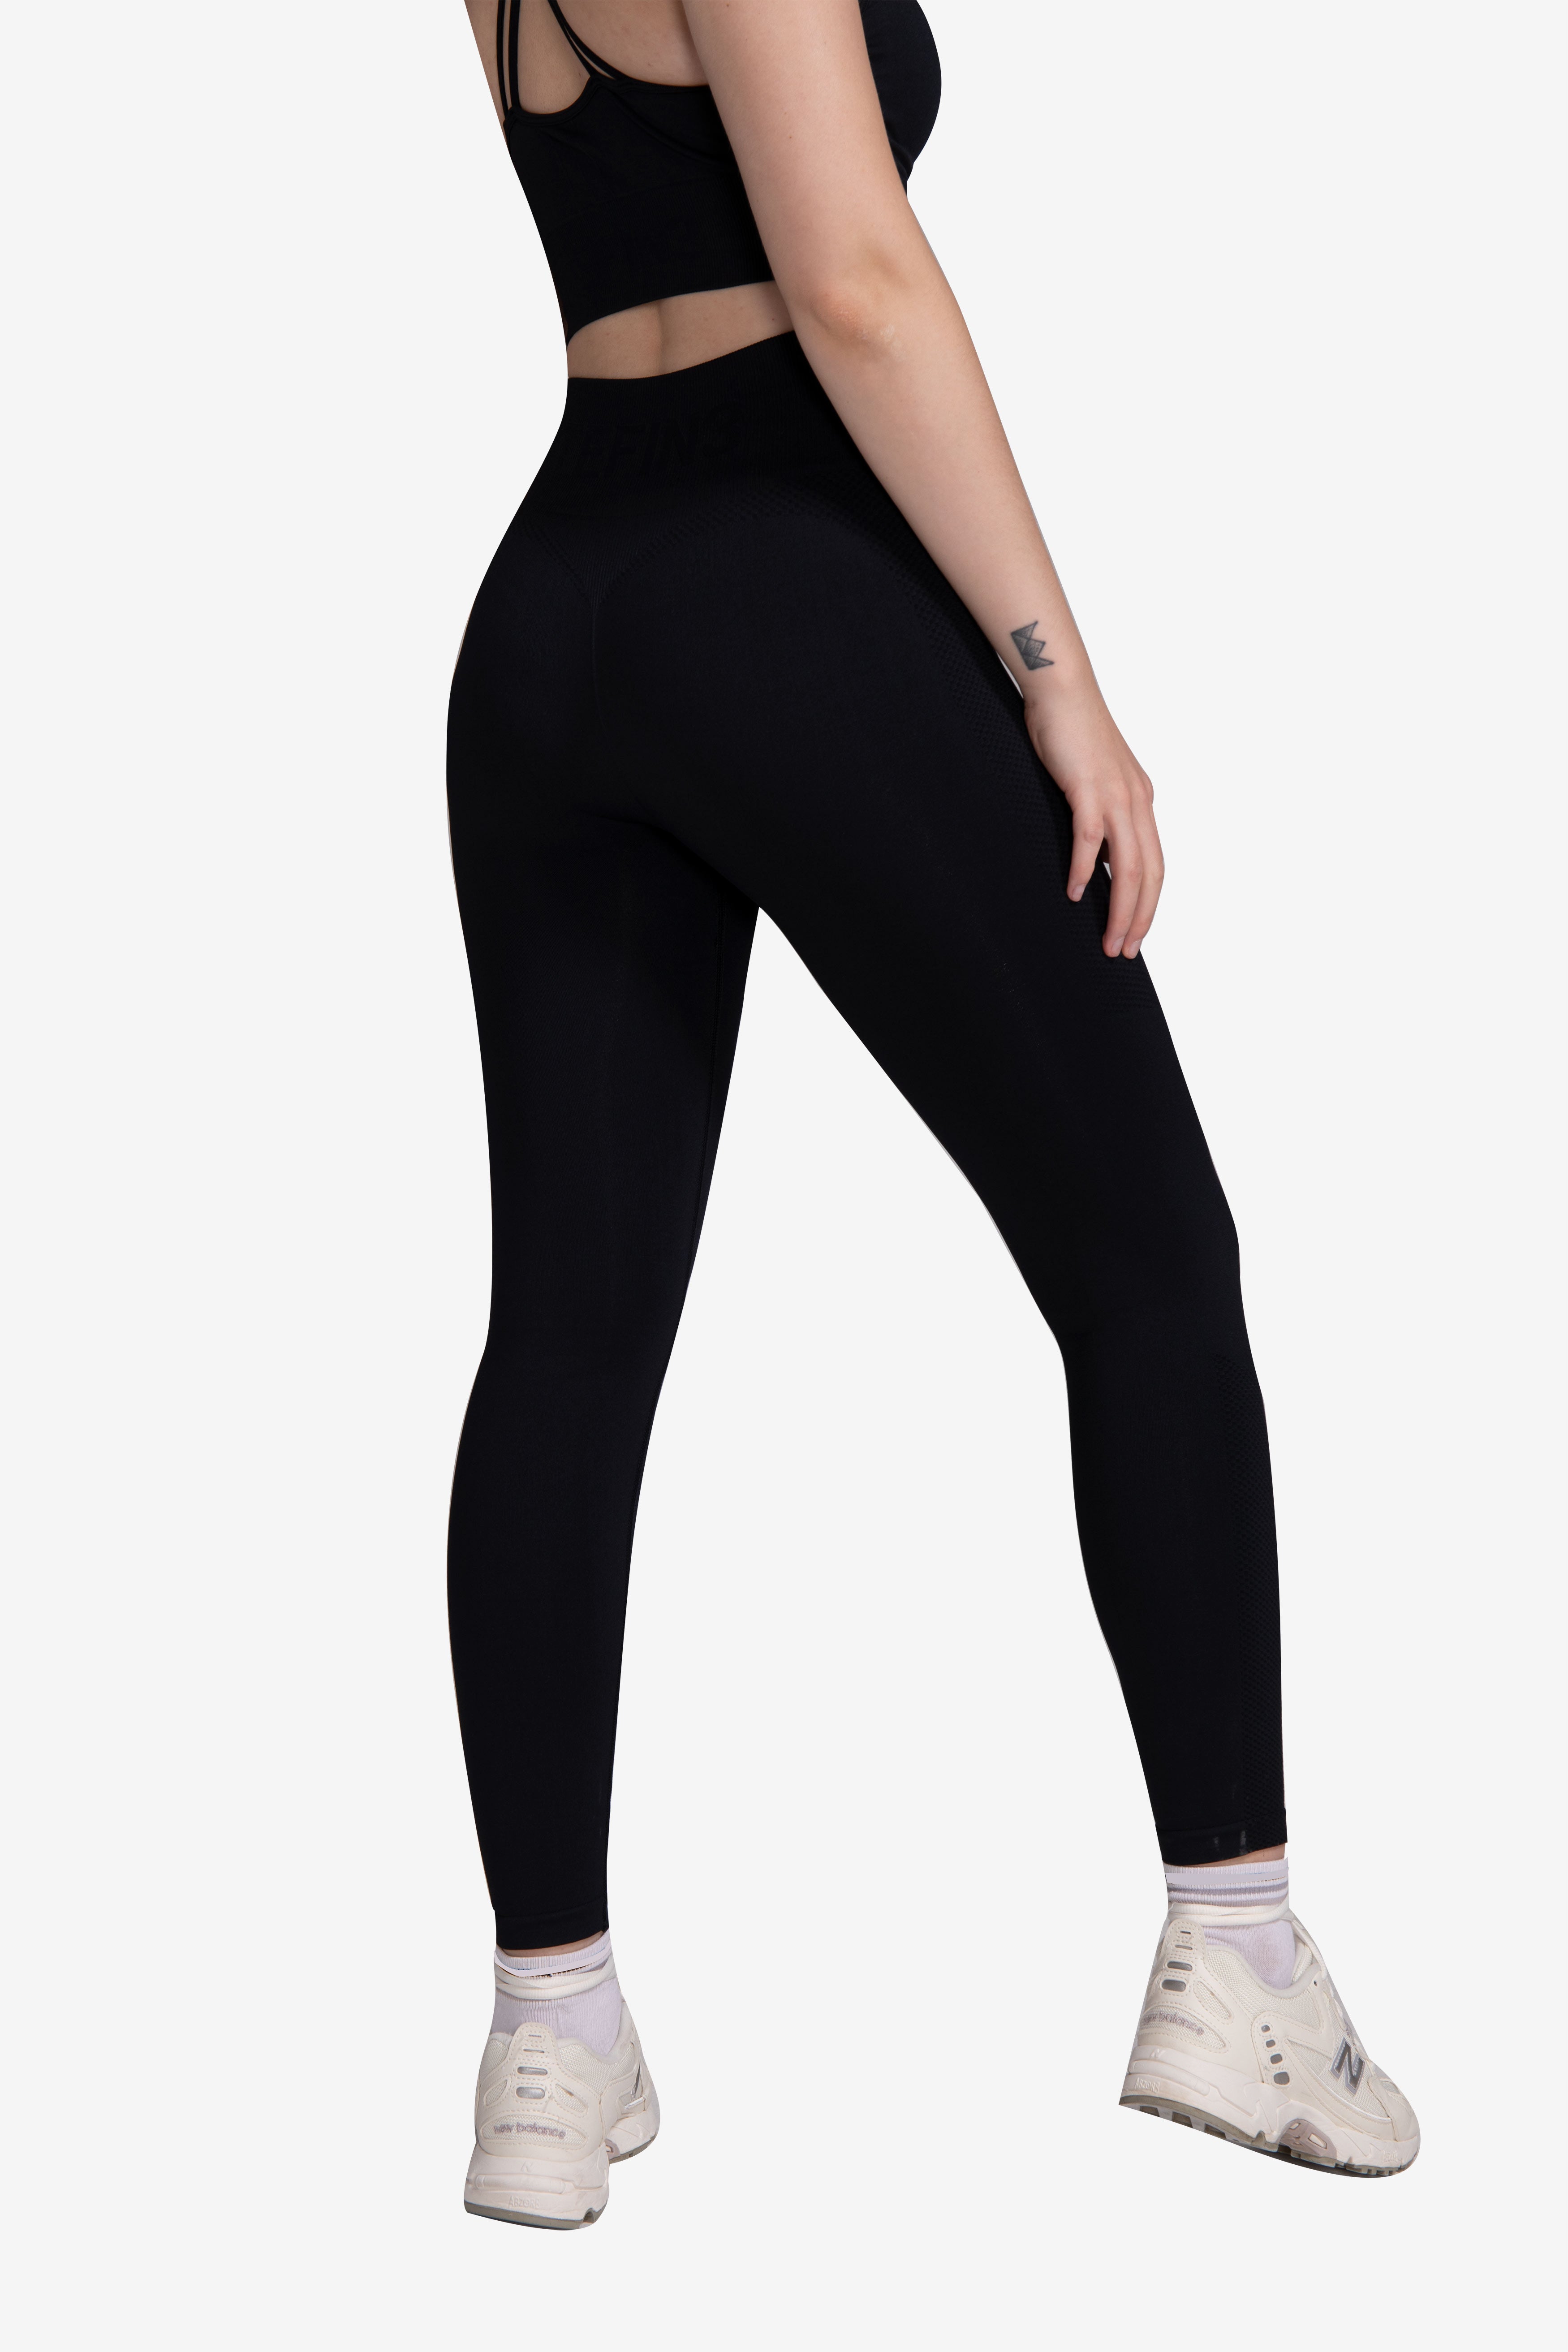 Infispace® High Waist Solid Black Woman Legging for Casual